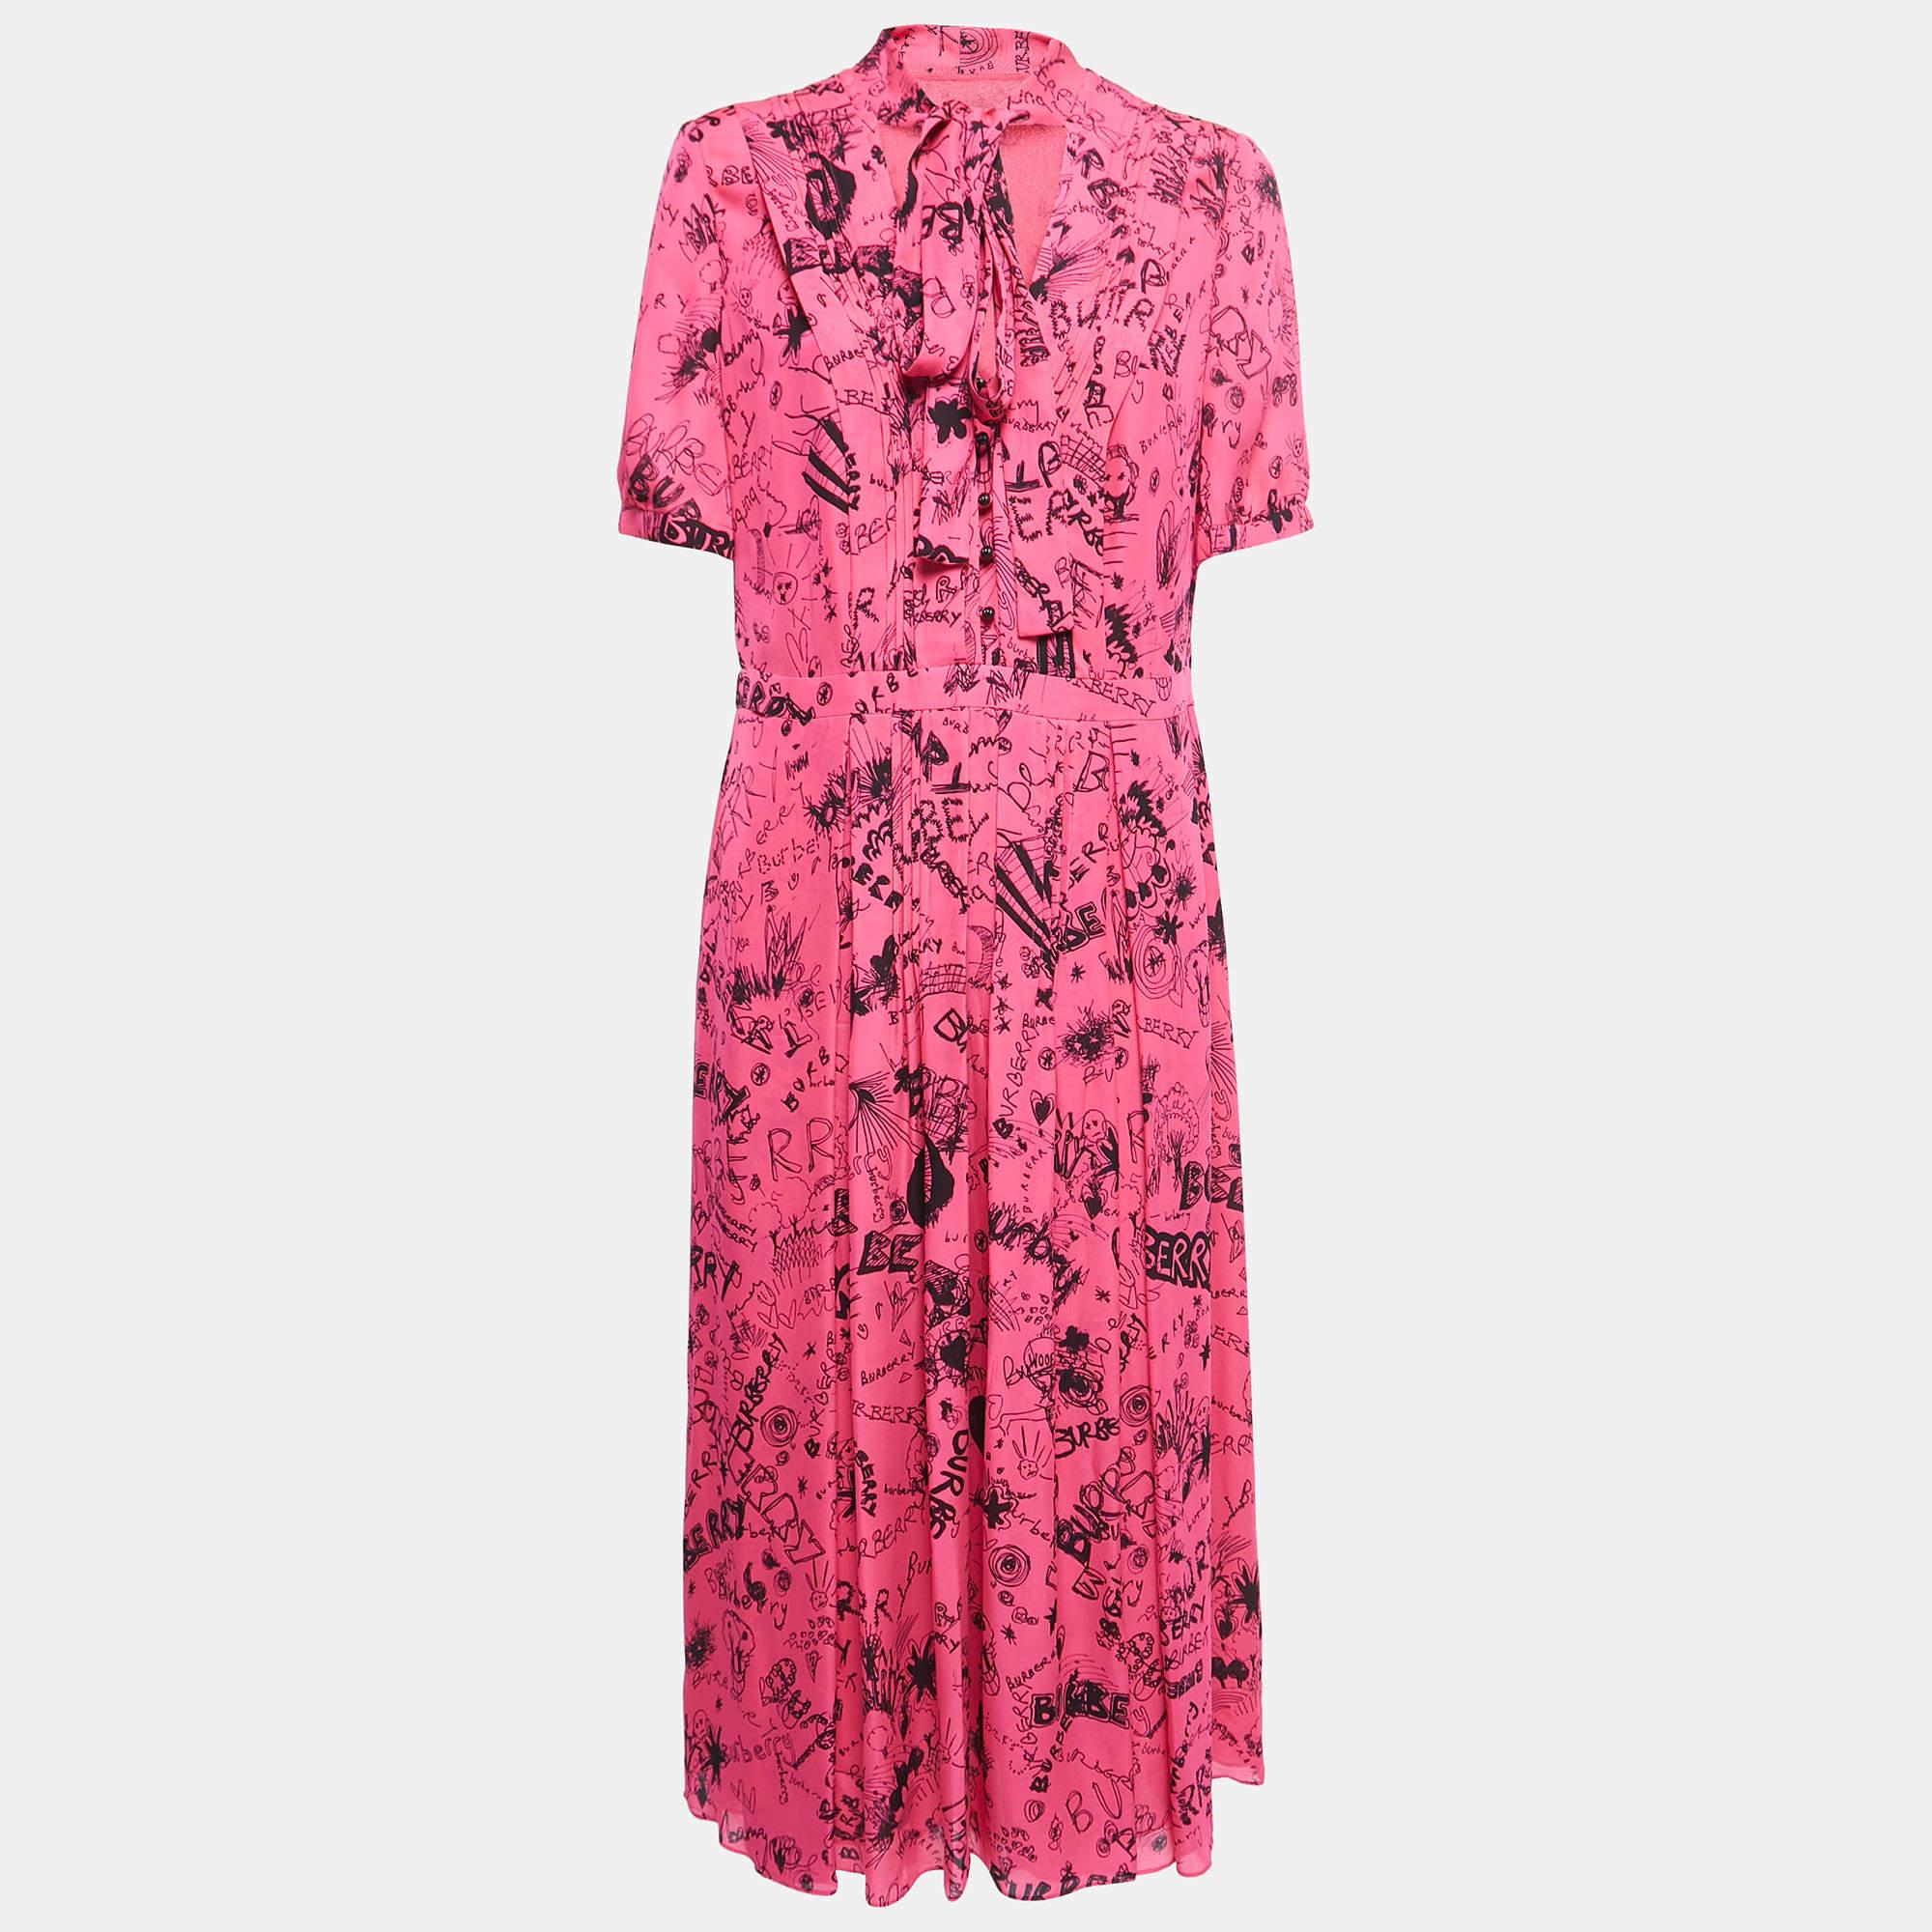 This stylish midi dress exudes elegance and sophistication. Its flattering length falls between the knee and ankle, offering a versatile option for various occasions. With its chic design, it combines modern trends with timeless charm, making it a